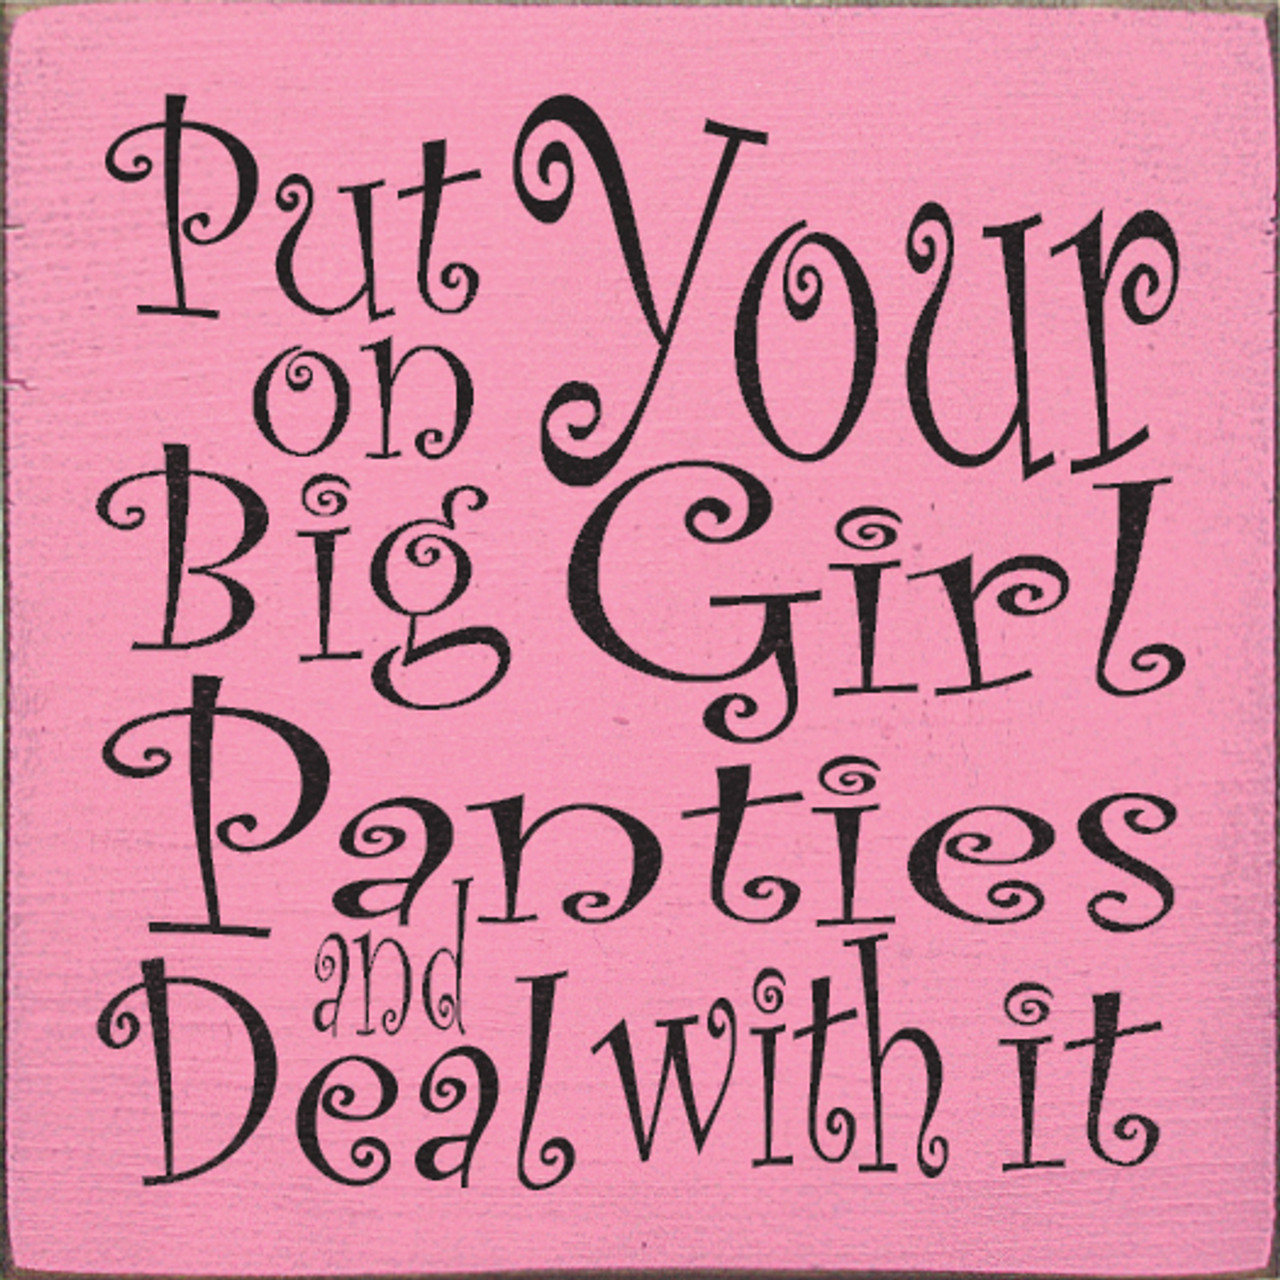 Put On Your Big Girl Panties And Deal With It, Inspirational Wood Signs